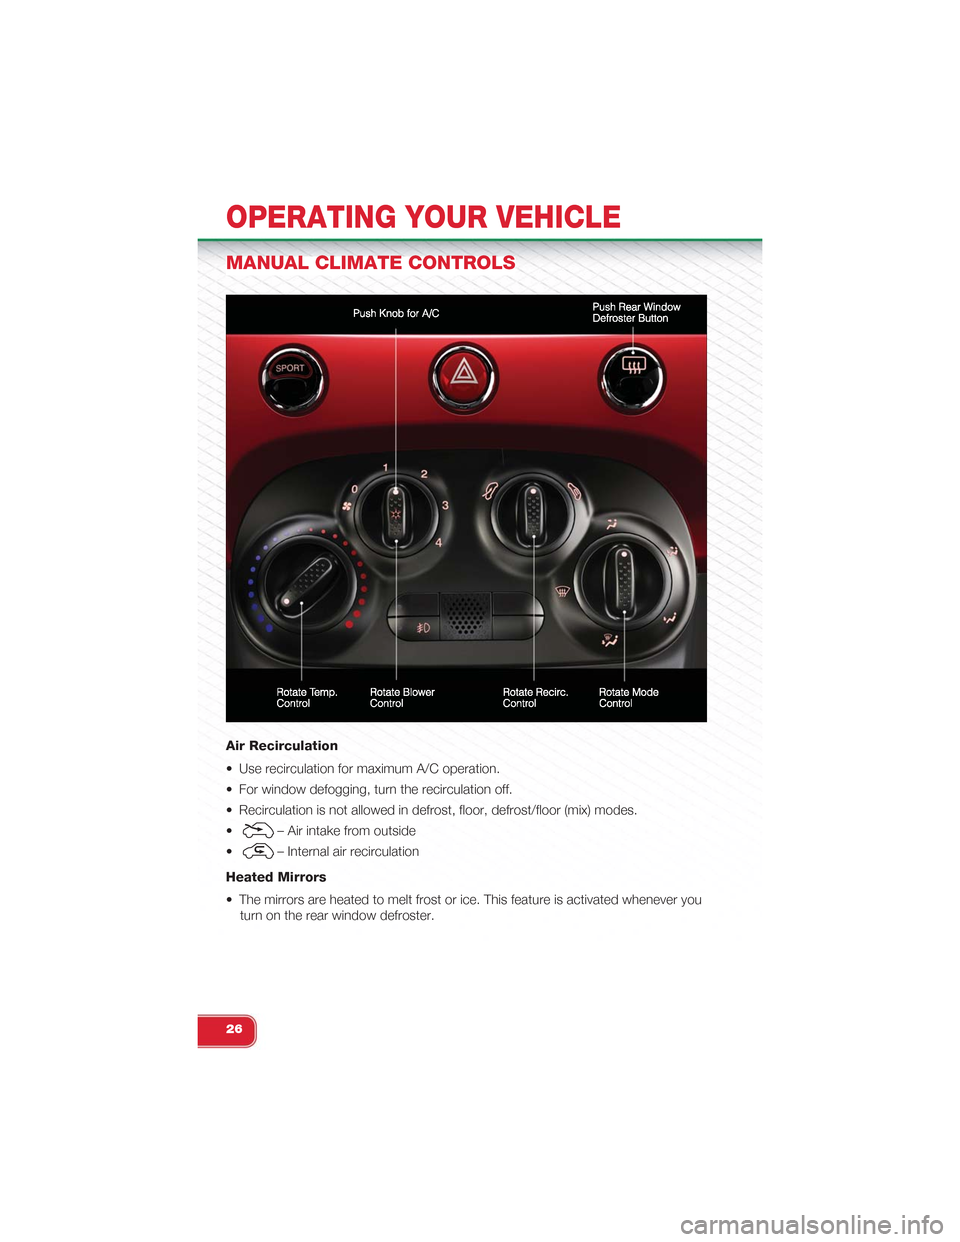 FIAT 500 ABARTH 2014 2.G User Guide MANUAL CLIMATE CONTROLS
Air Recirculation
• Use recirculation for maximum A/C operation.
• For window defogging, turn the recirculation off.
• Recirculation is not allowed in defrost, floor, def